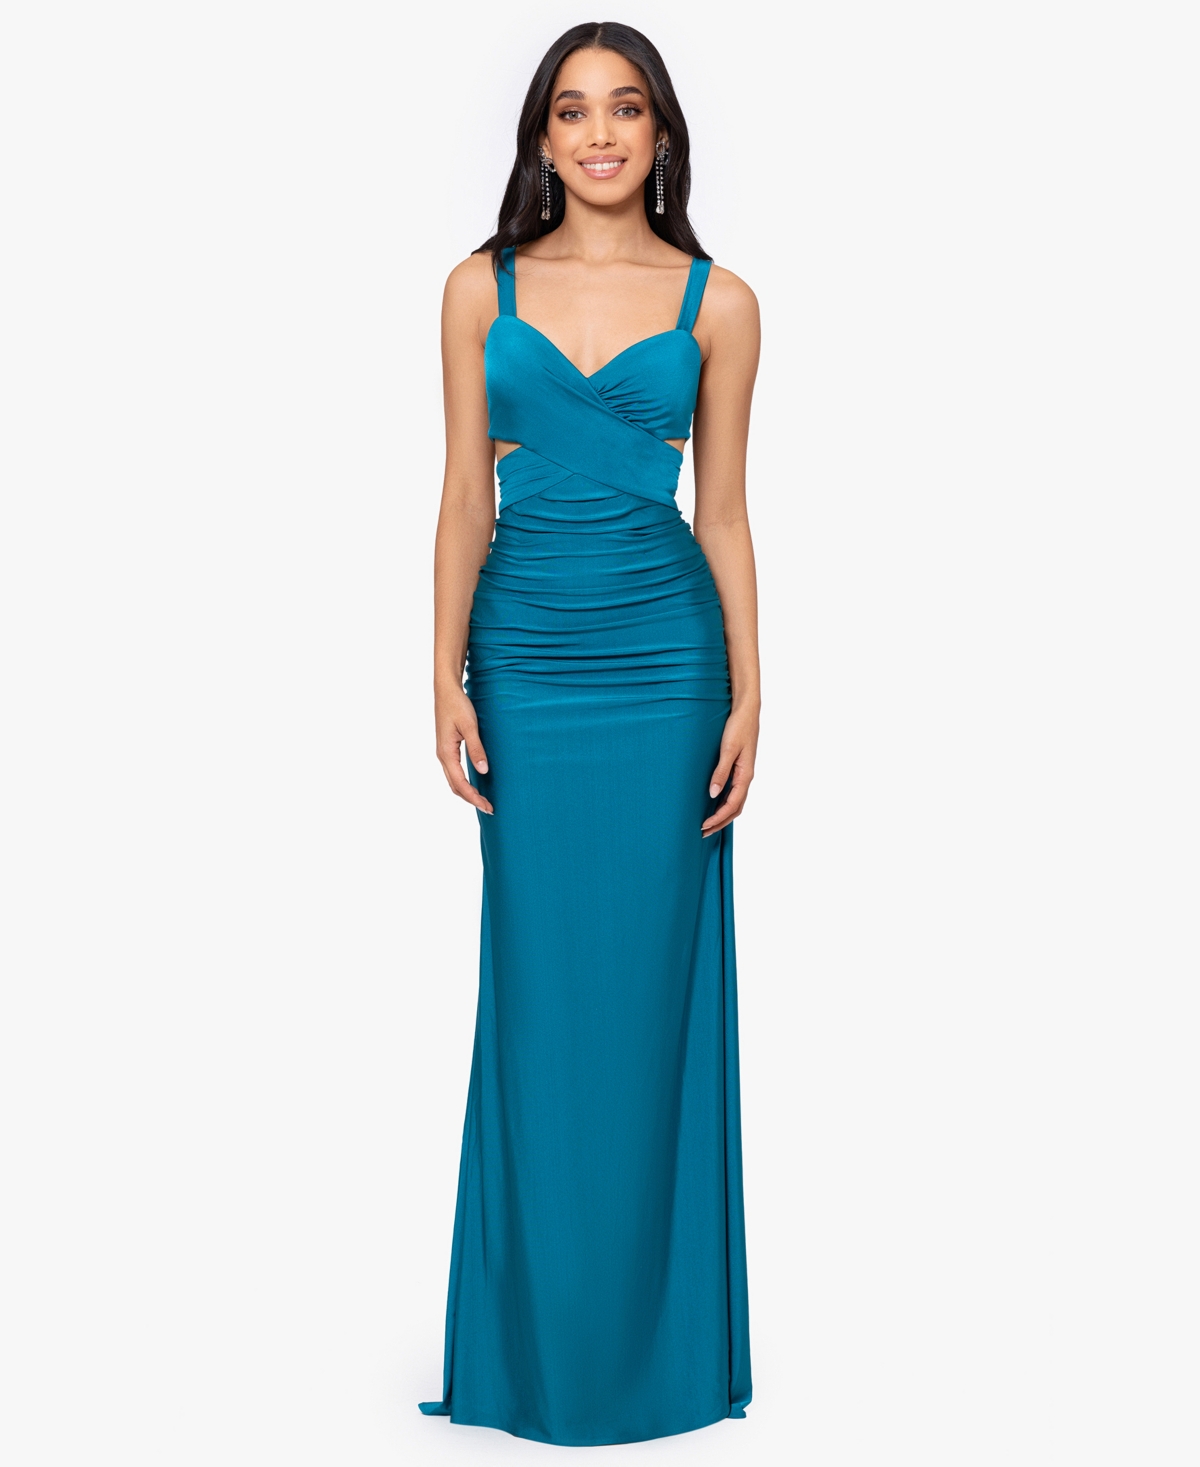 Juniors' Ruched Tie-Back Sleeveless Gown - Teal